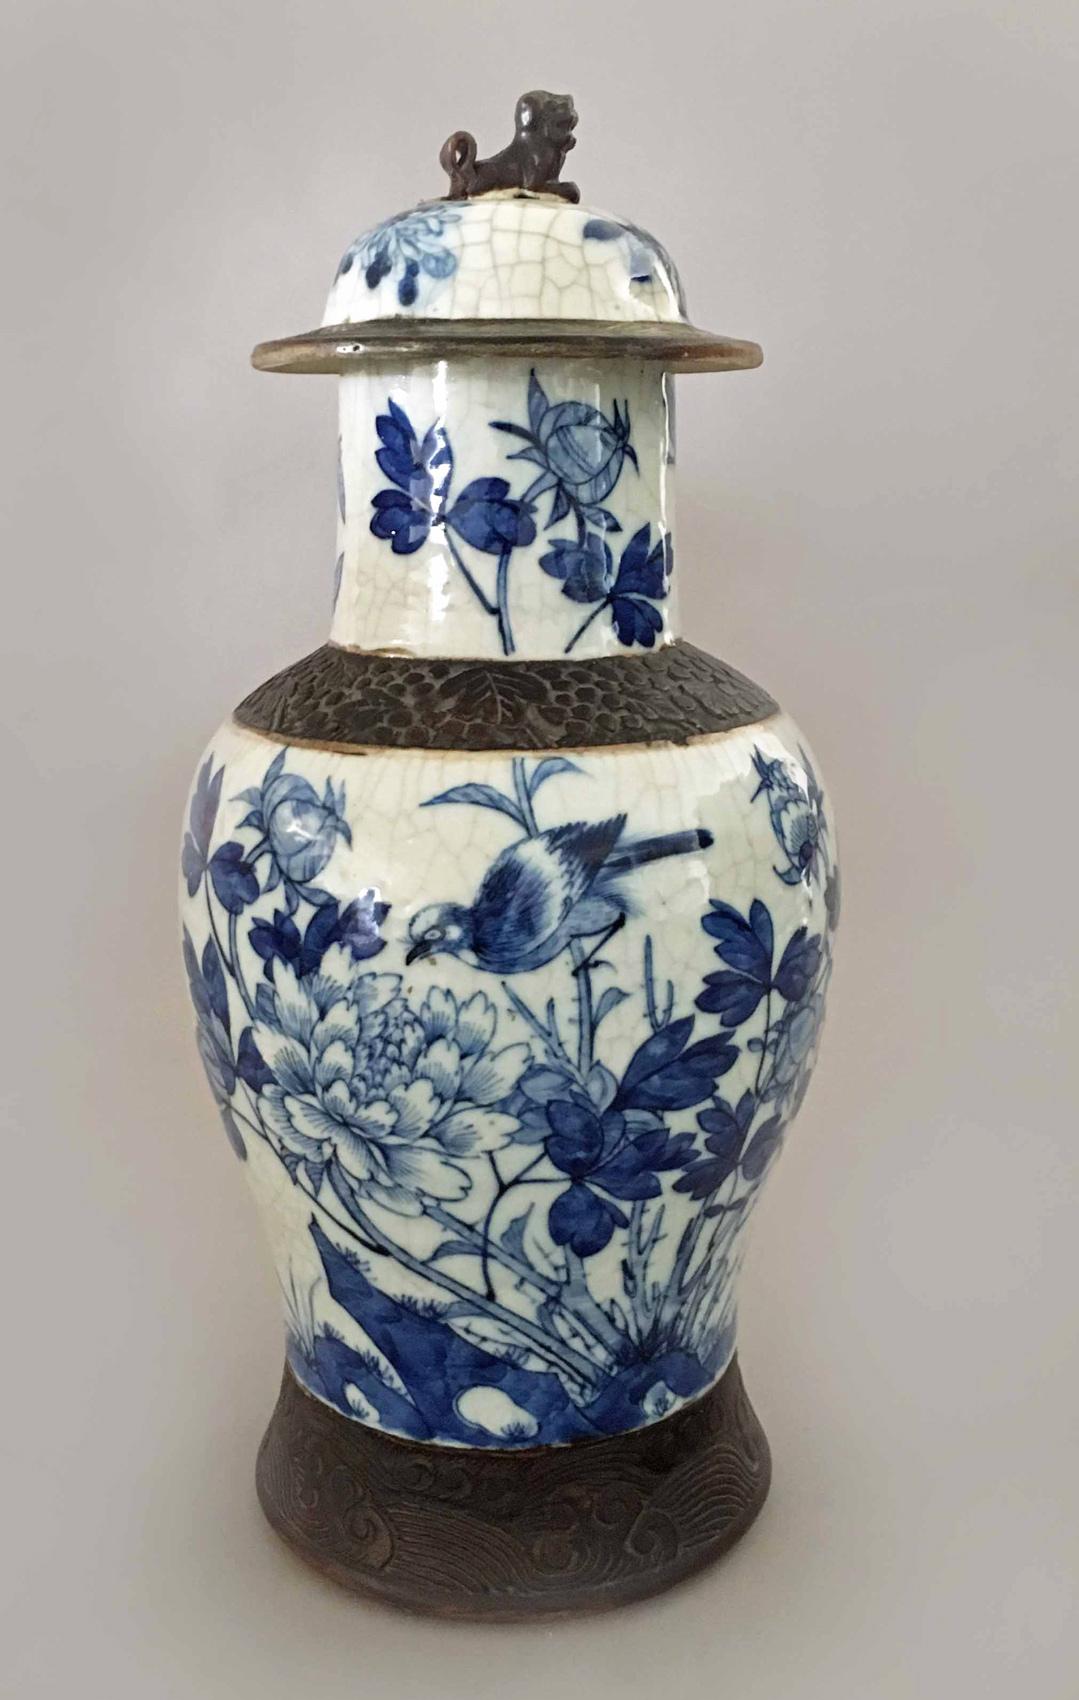 Chinese Export porcelain blue and white crackleware vase and cover decorated with birds, butterflies, peonies, chrysanthemums and foliage, the body having mat brown embossed collar and base, the cover with a foo dog finial. A brown date mark to the